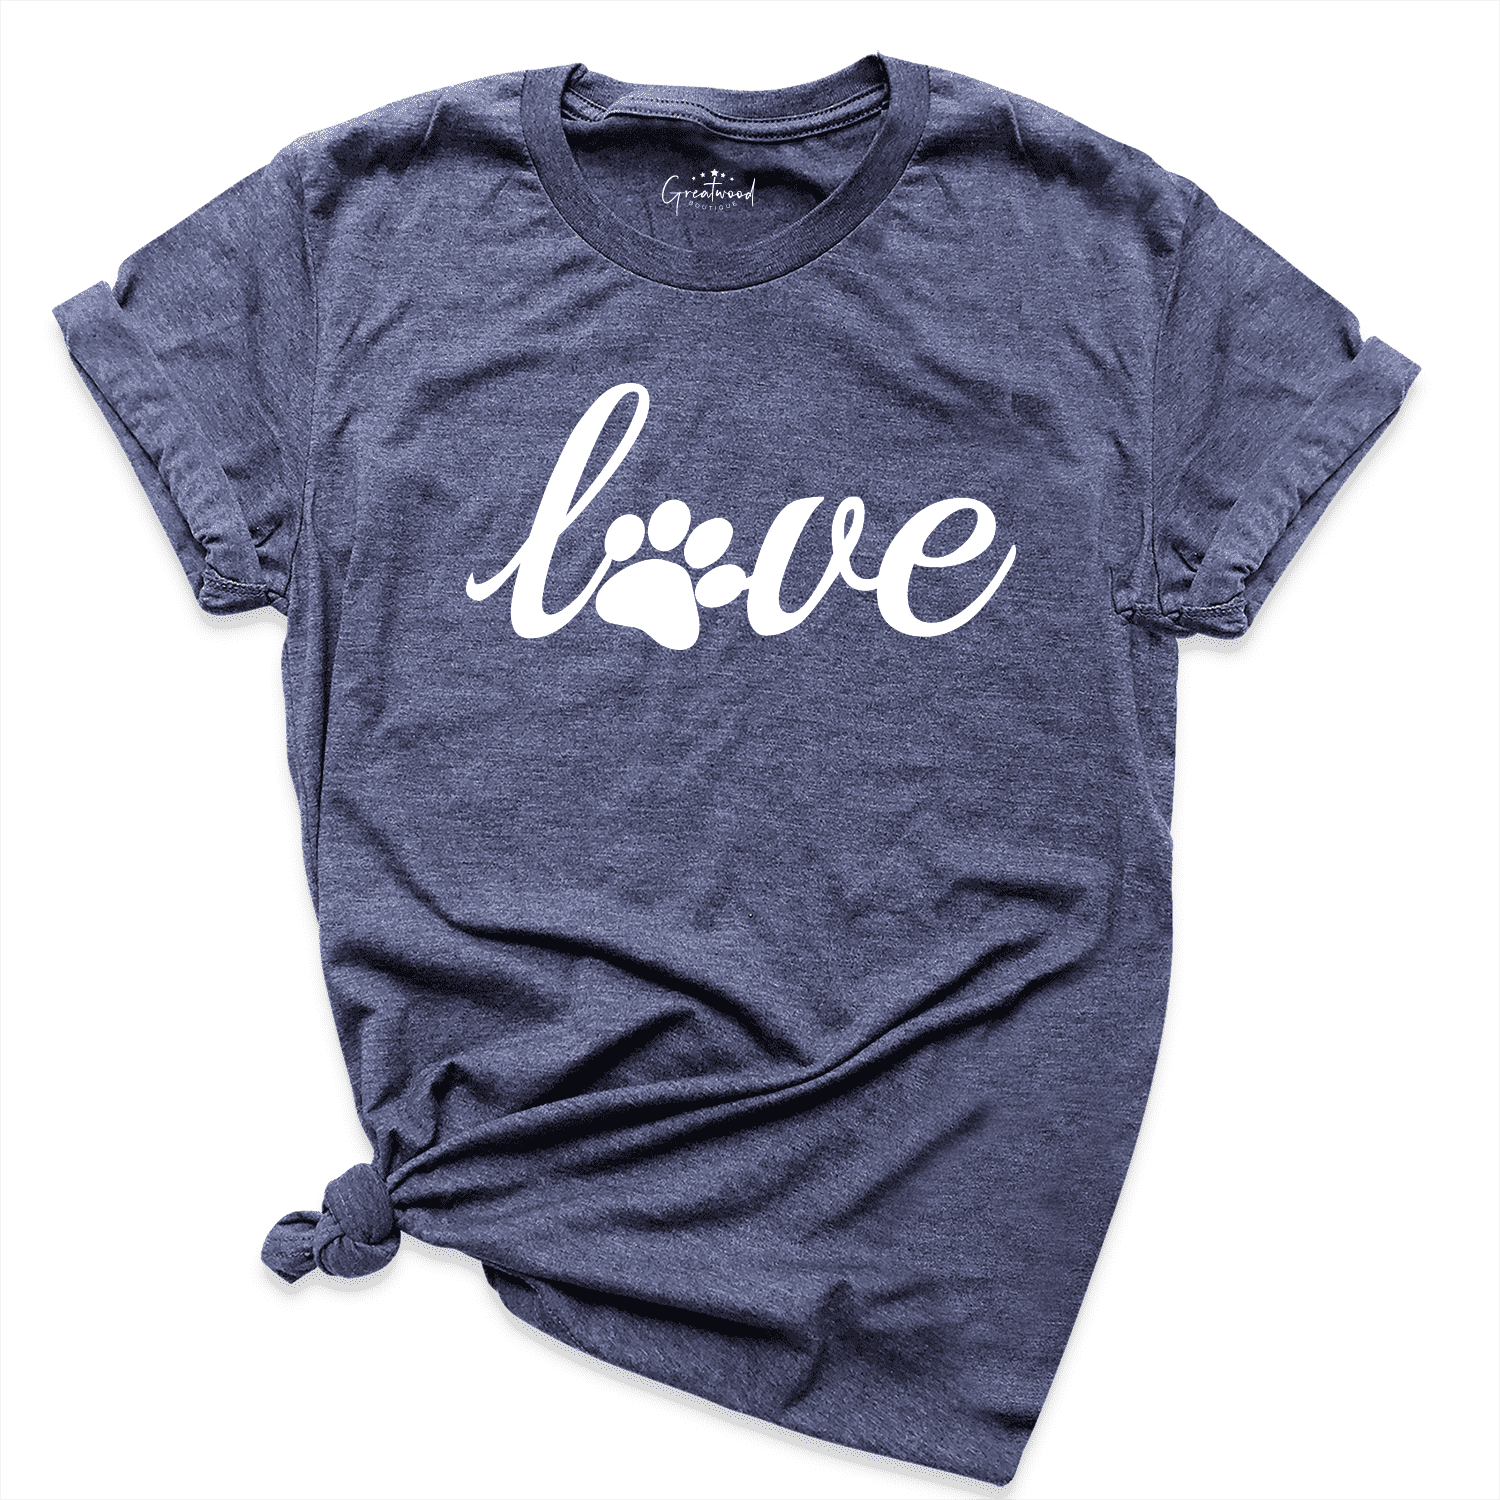 Love Animal Shirt Navy - Greatwood Boutique